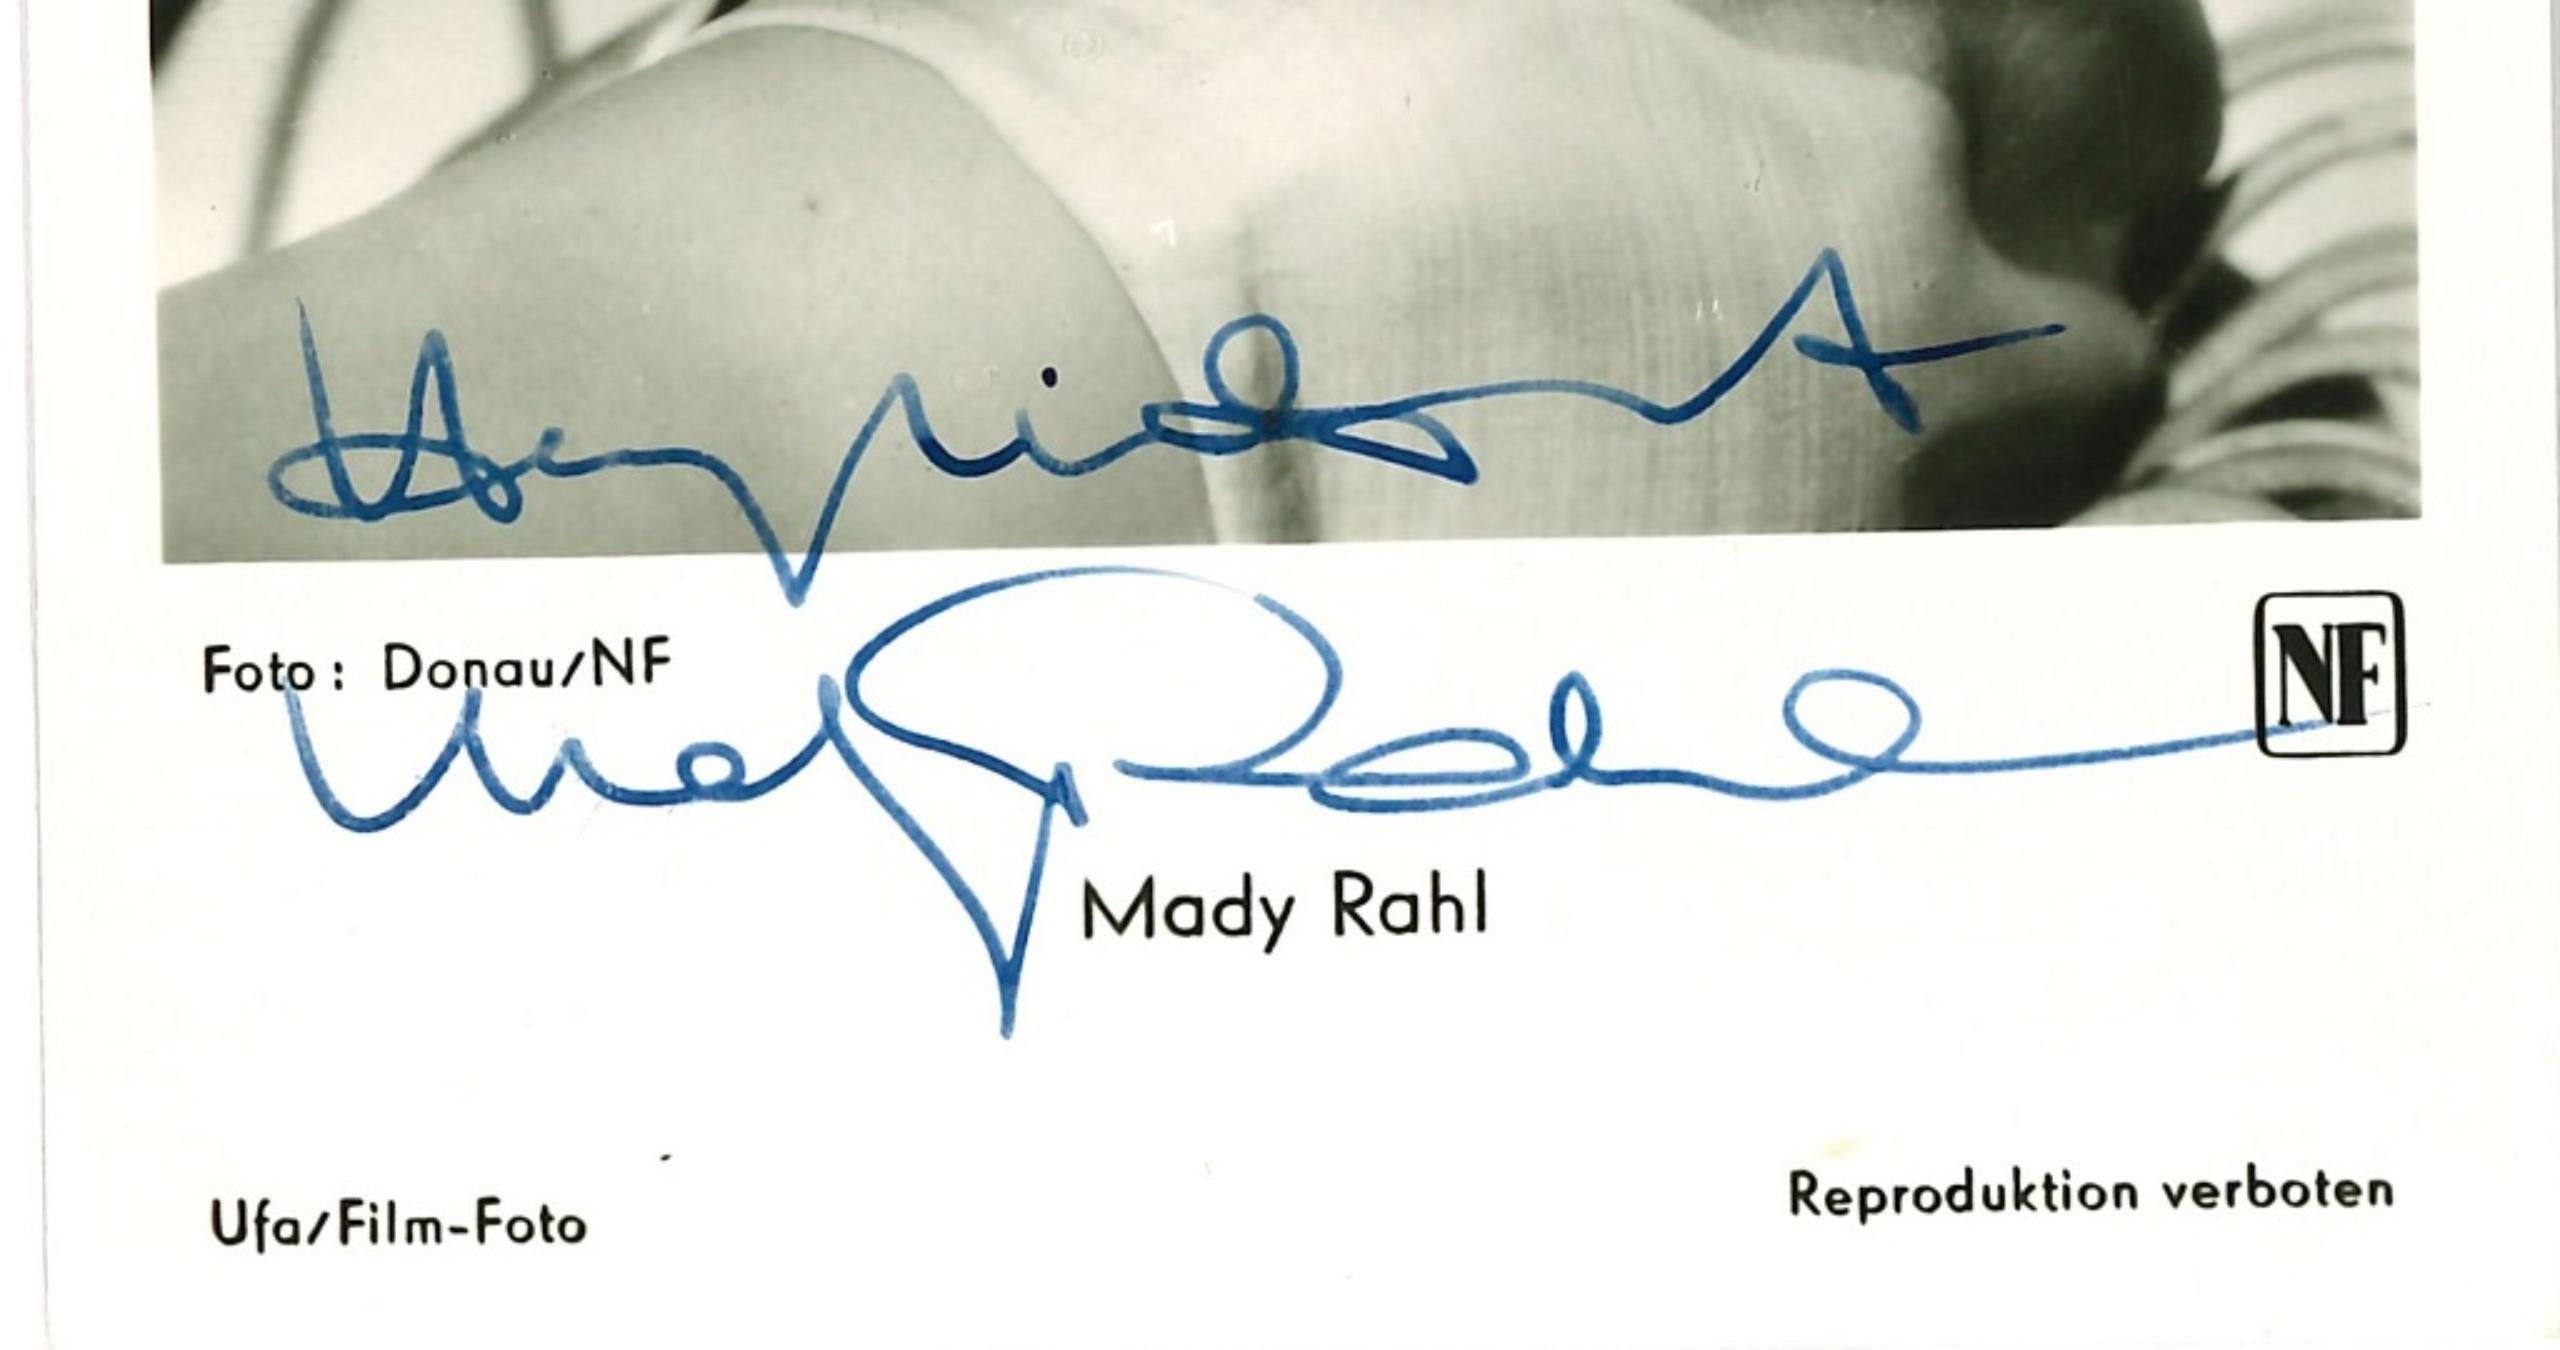 Autographed Portrait of Mady Rahl - Vintage b/w Postcard - 1950s - Photograph by Unknown